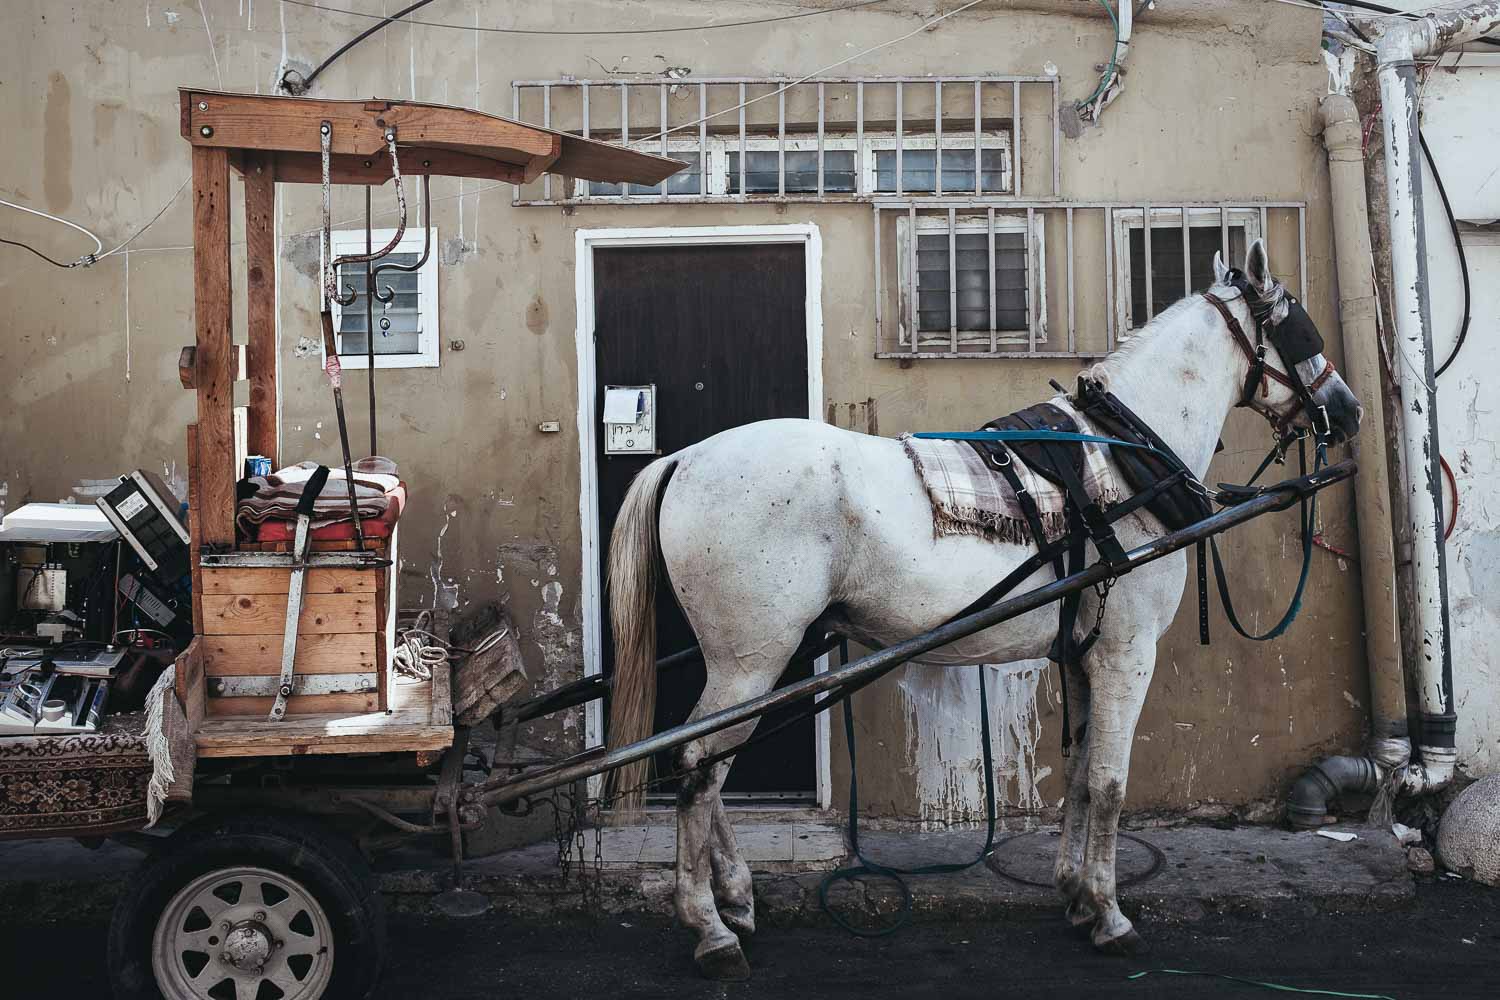 This photo shows the fine art print The Streets of Tel Aviv by Philip Reitsperger